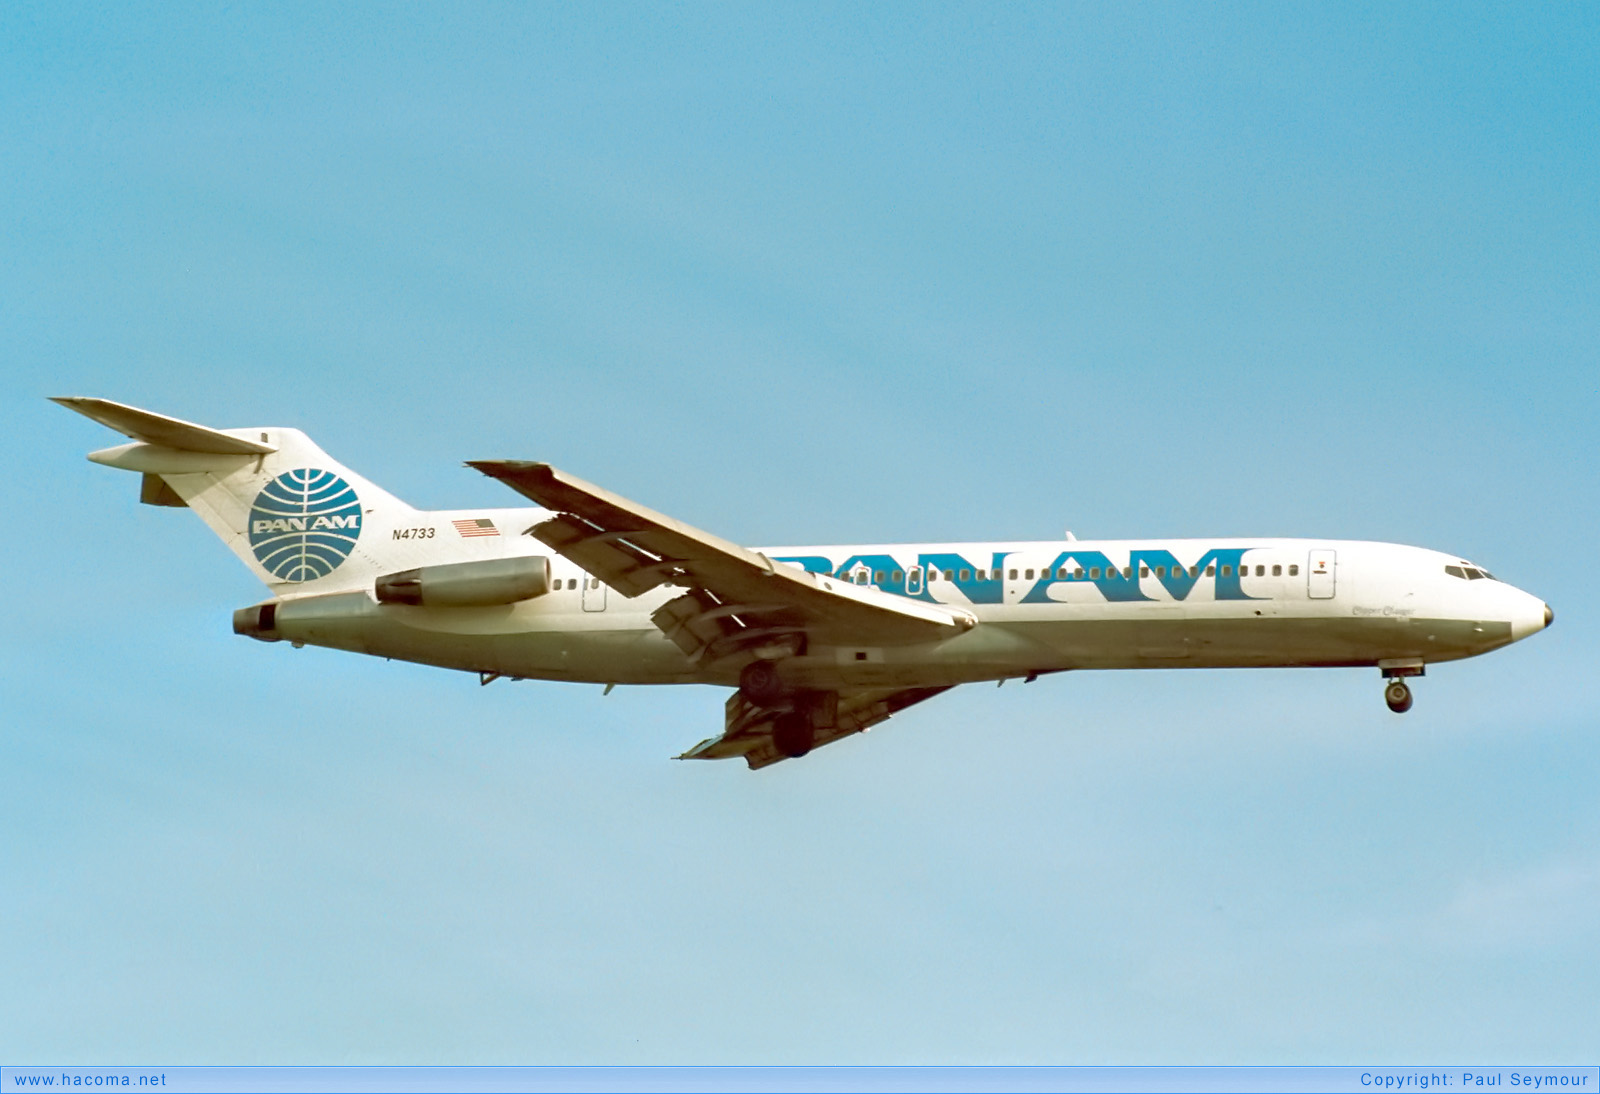 Photo of N4733 - Pan Am Clipper Charger - London Heathrow Airport - May 6, 1989